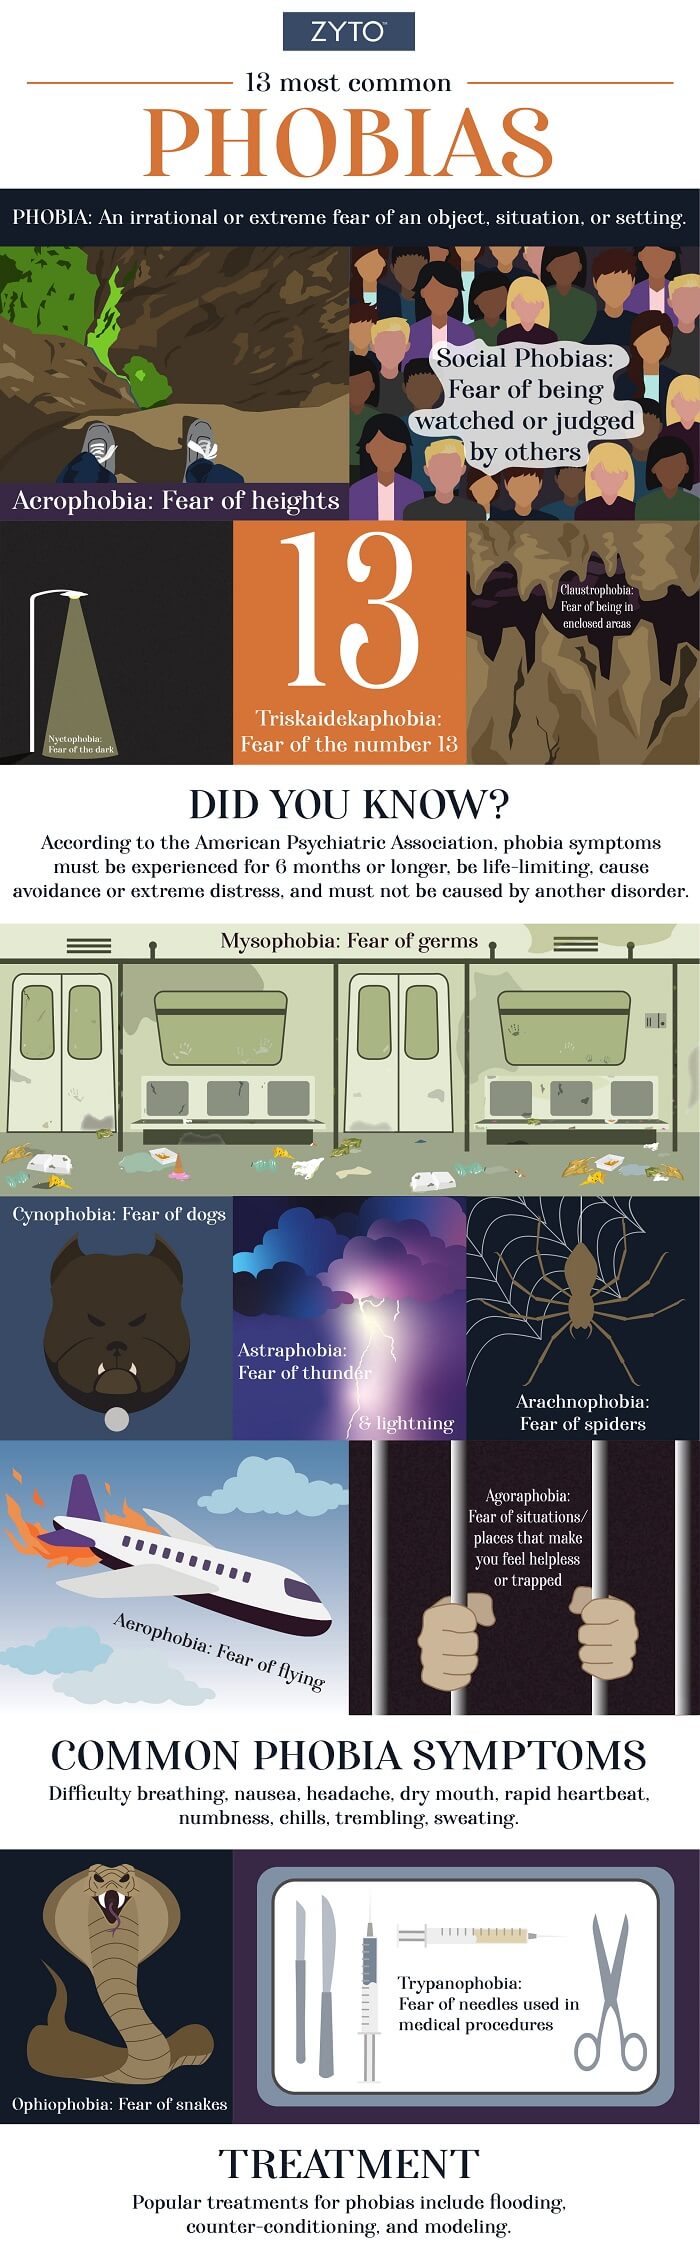 most common phobias in the world infographic